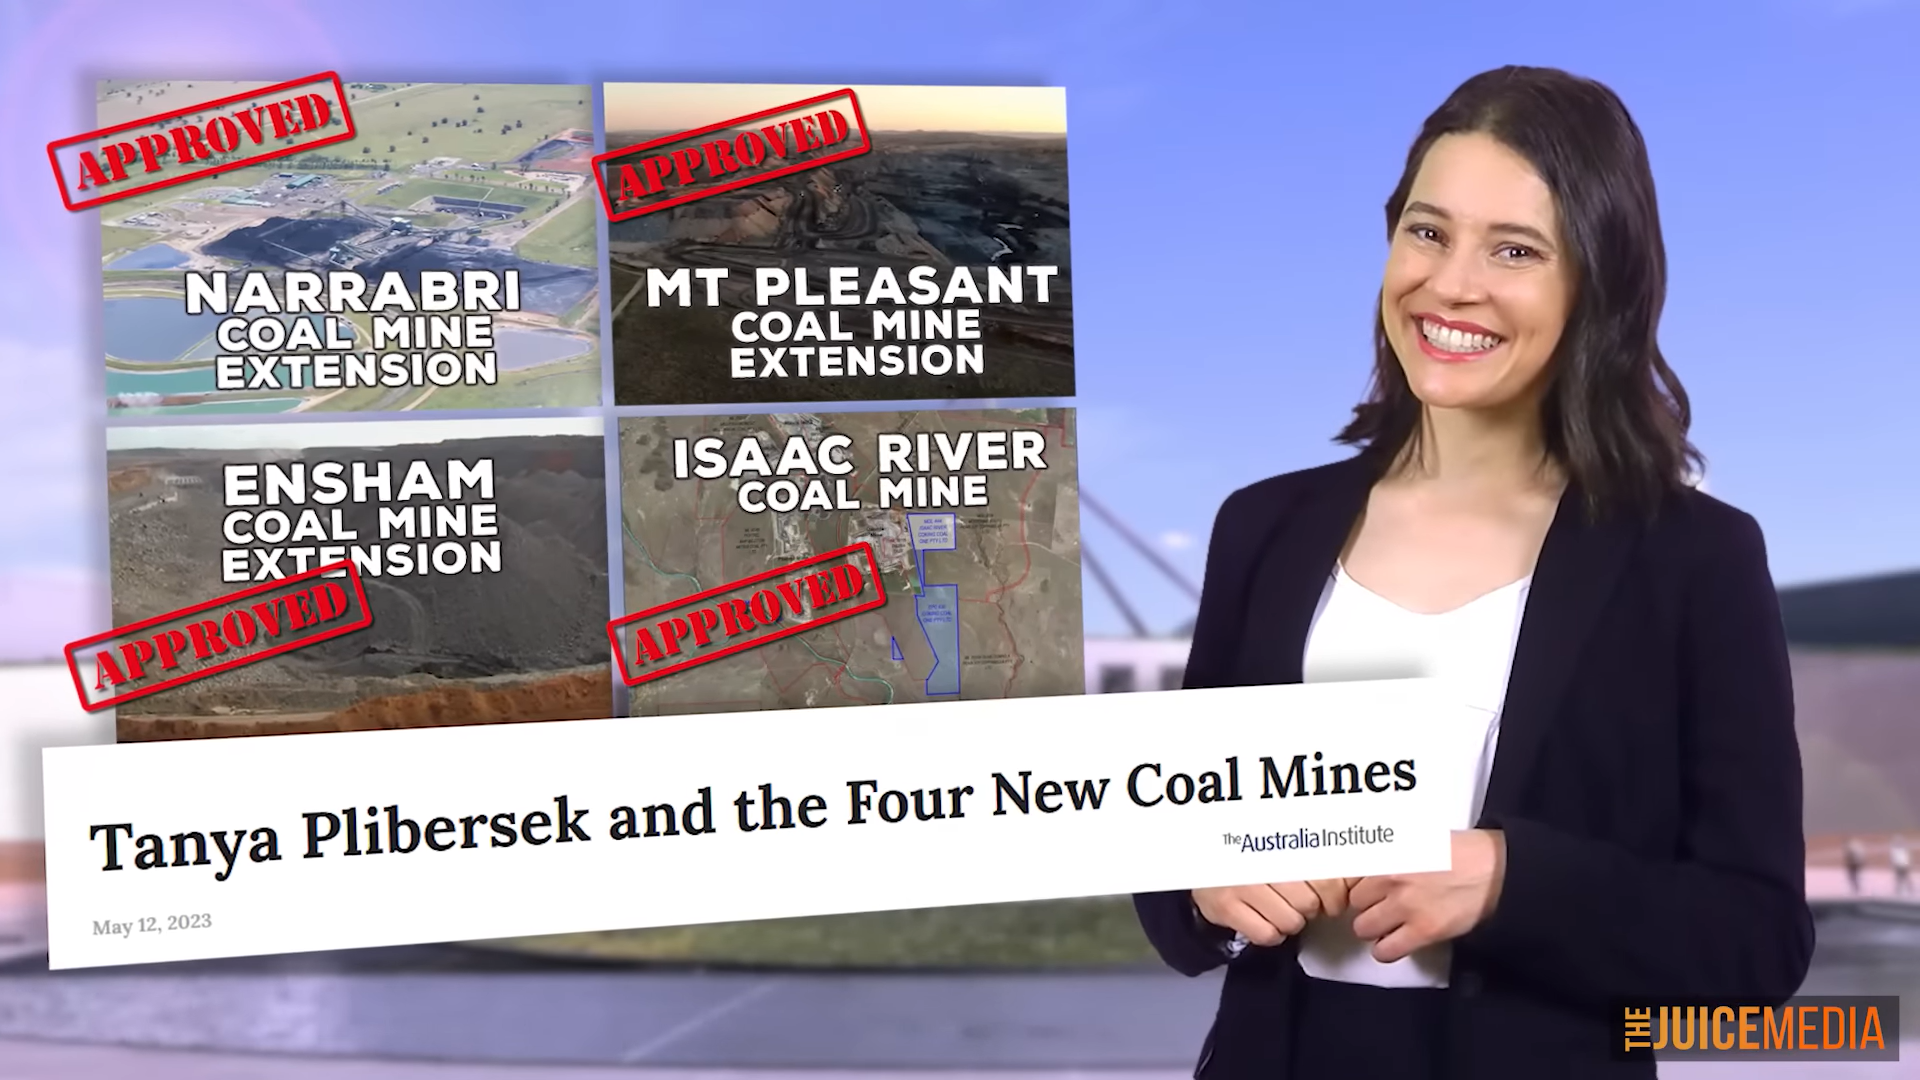 Screenshot from the “Honest Government Ad: COP31 🇦🇺 & the Pacific”, by The Juice Media, showing the approval of four coal mines in Australia on 11 May 2023: Narrabri Underground Mine (NSW), Mount Pleasant Mine (NSW),  Ensham Mine (QLD), and Isaac River (QLD). Photo: The Juice Media